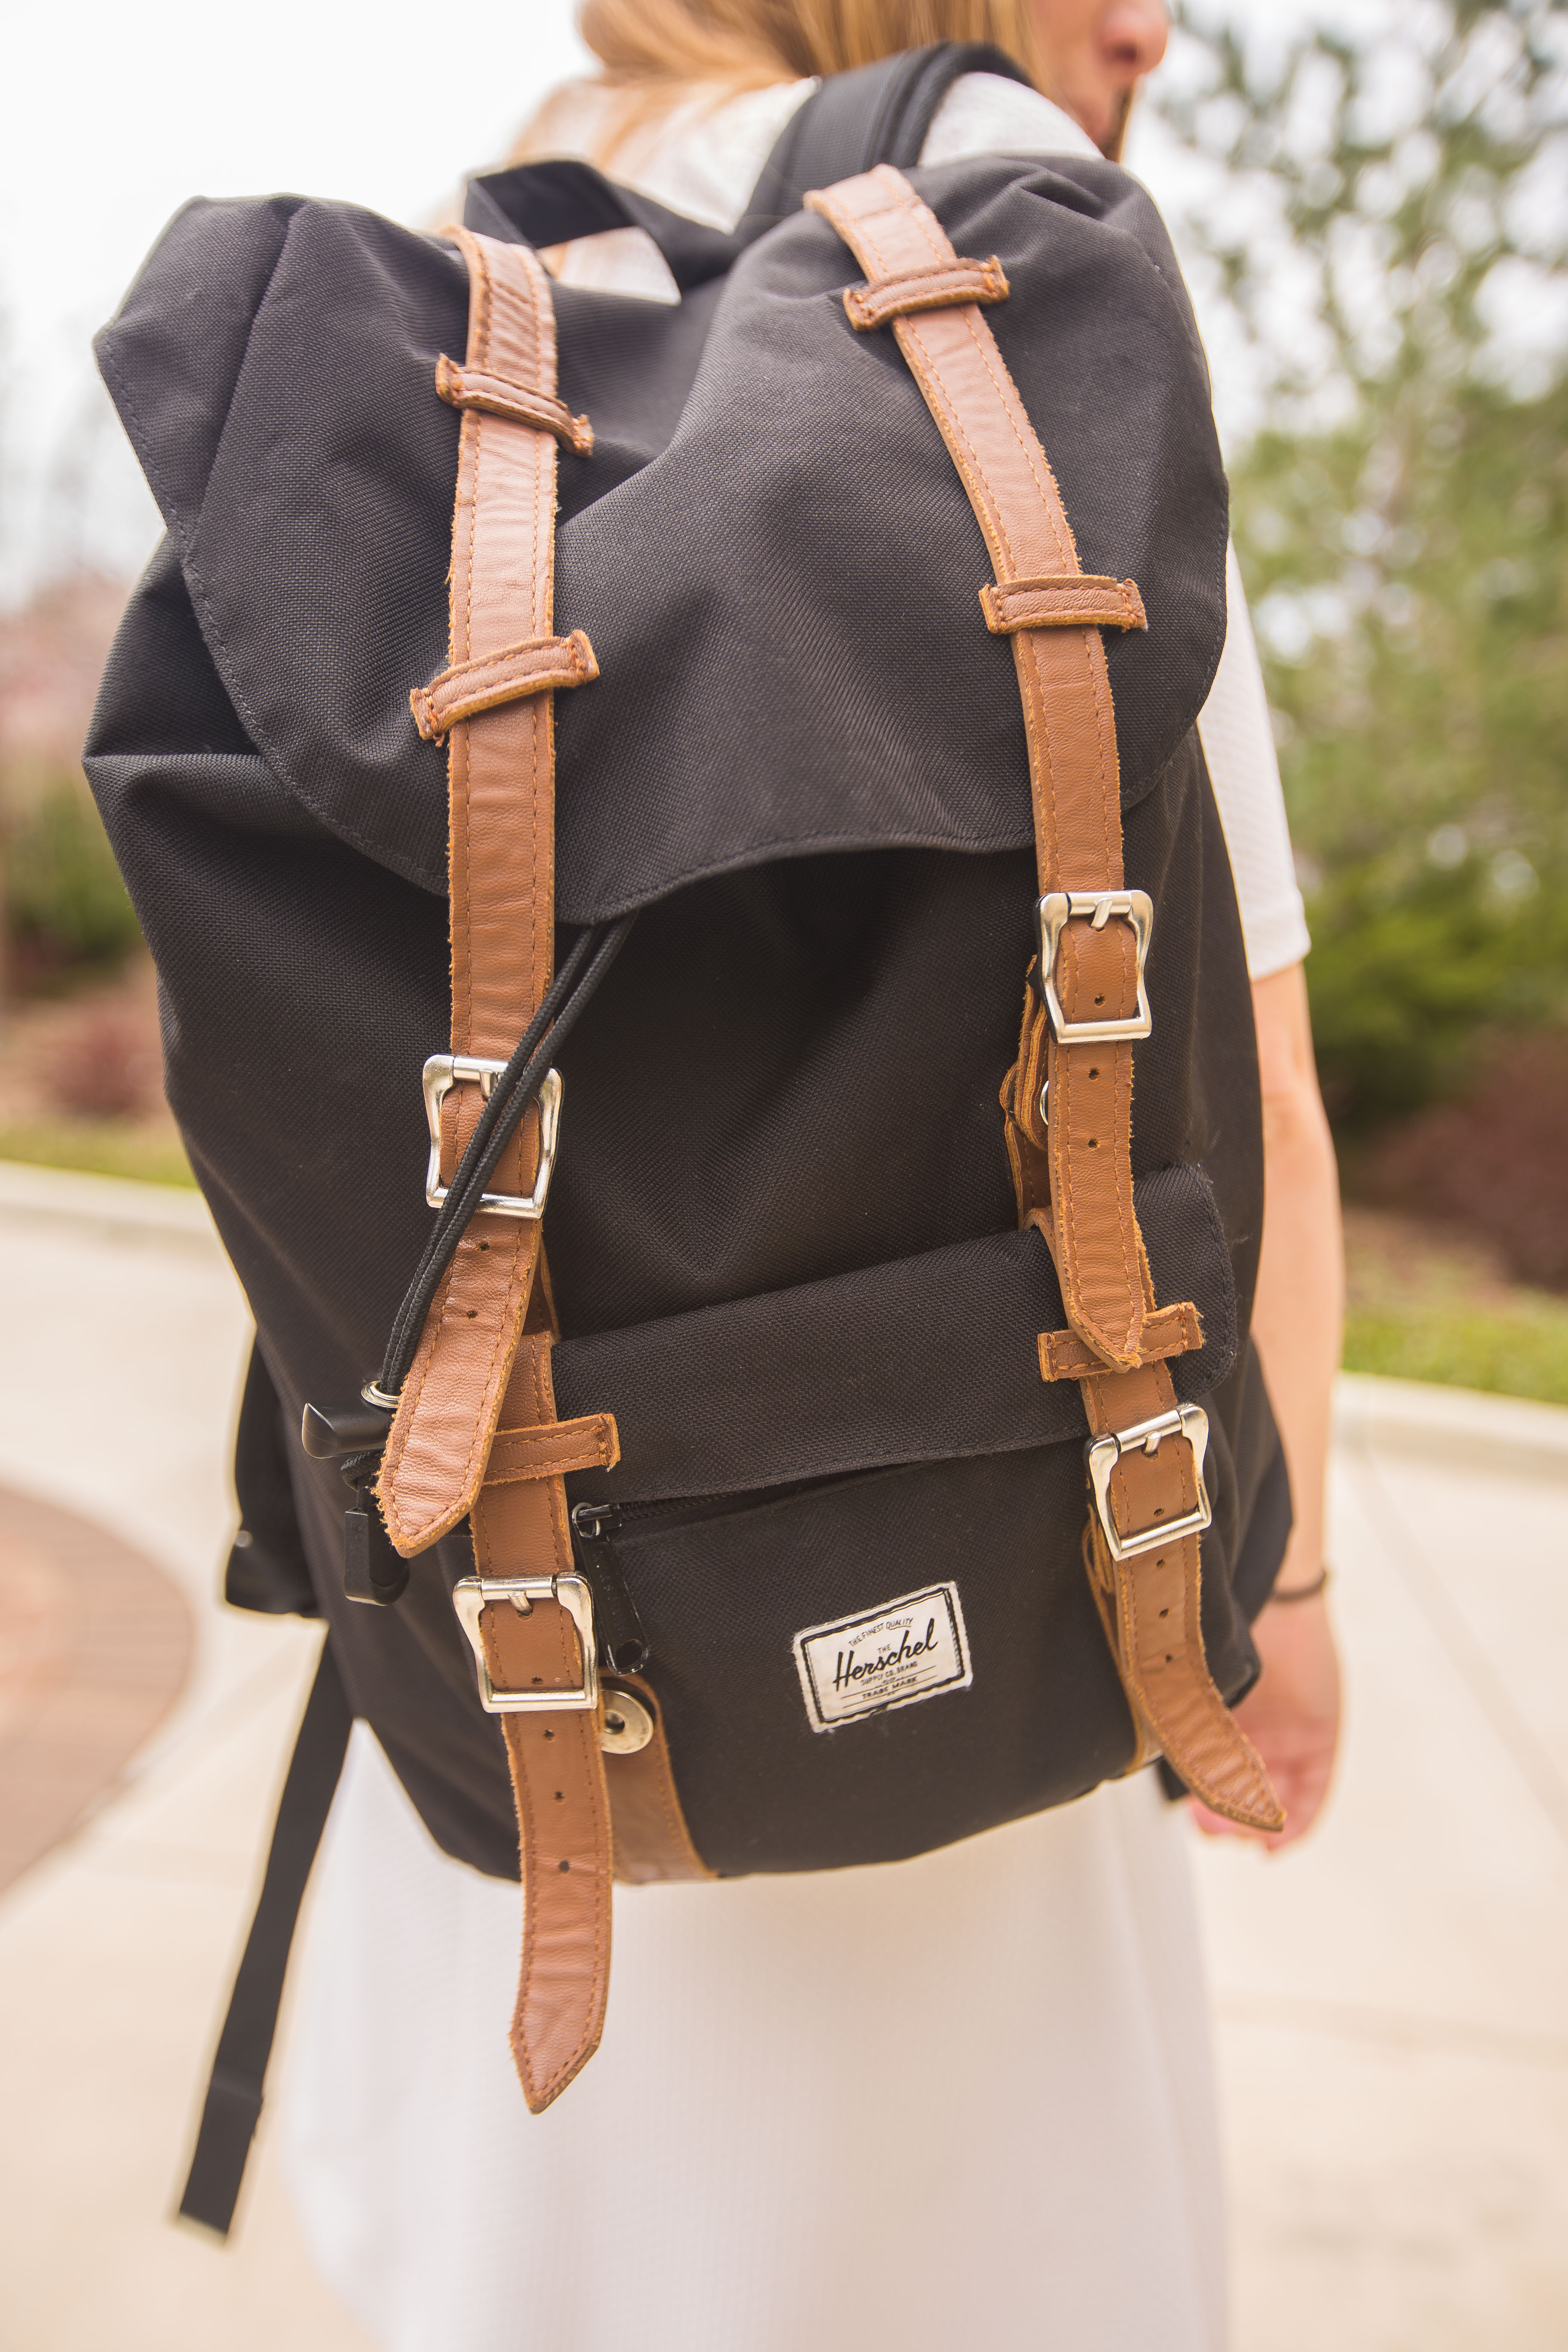 10 popular backpacks brands on campus - The Daily Universe